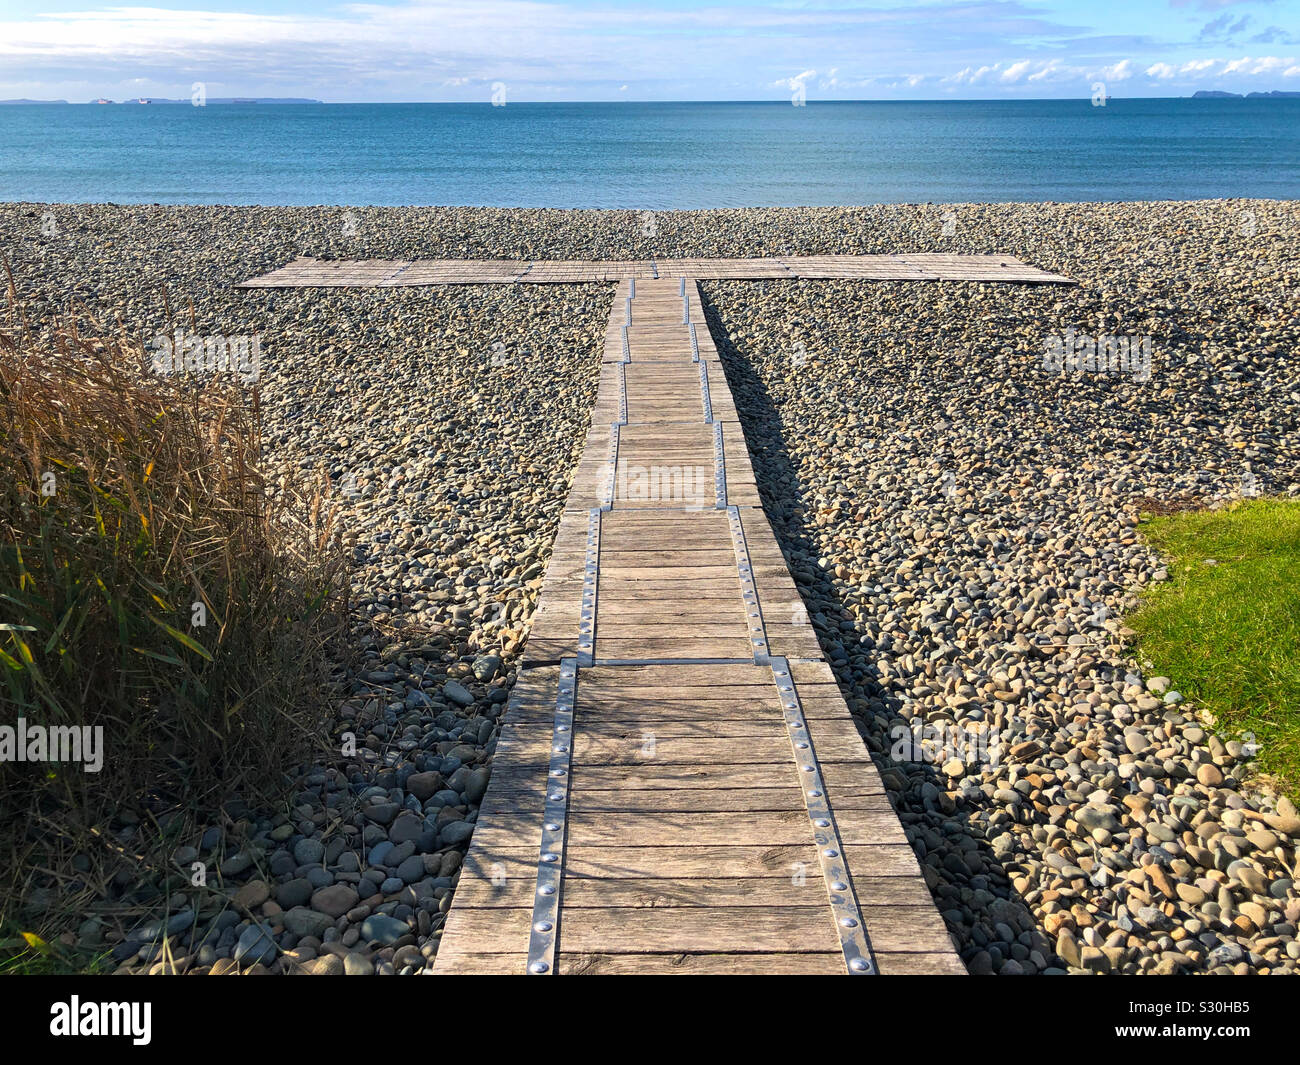 Wooden boardwalk over the pebbles at Newgale Beach, Pembrokeshire, Wales in the Pembrokeshire Coast National Park. Stock Photo